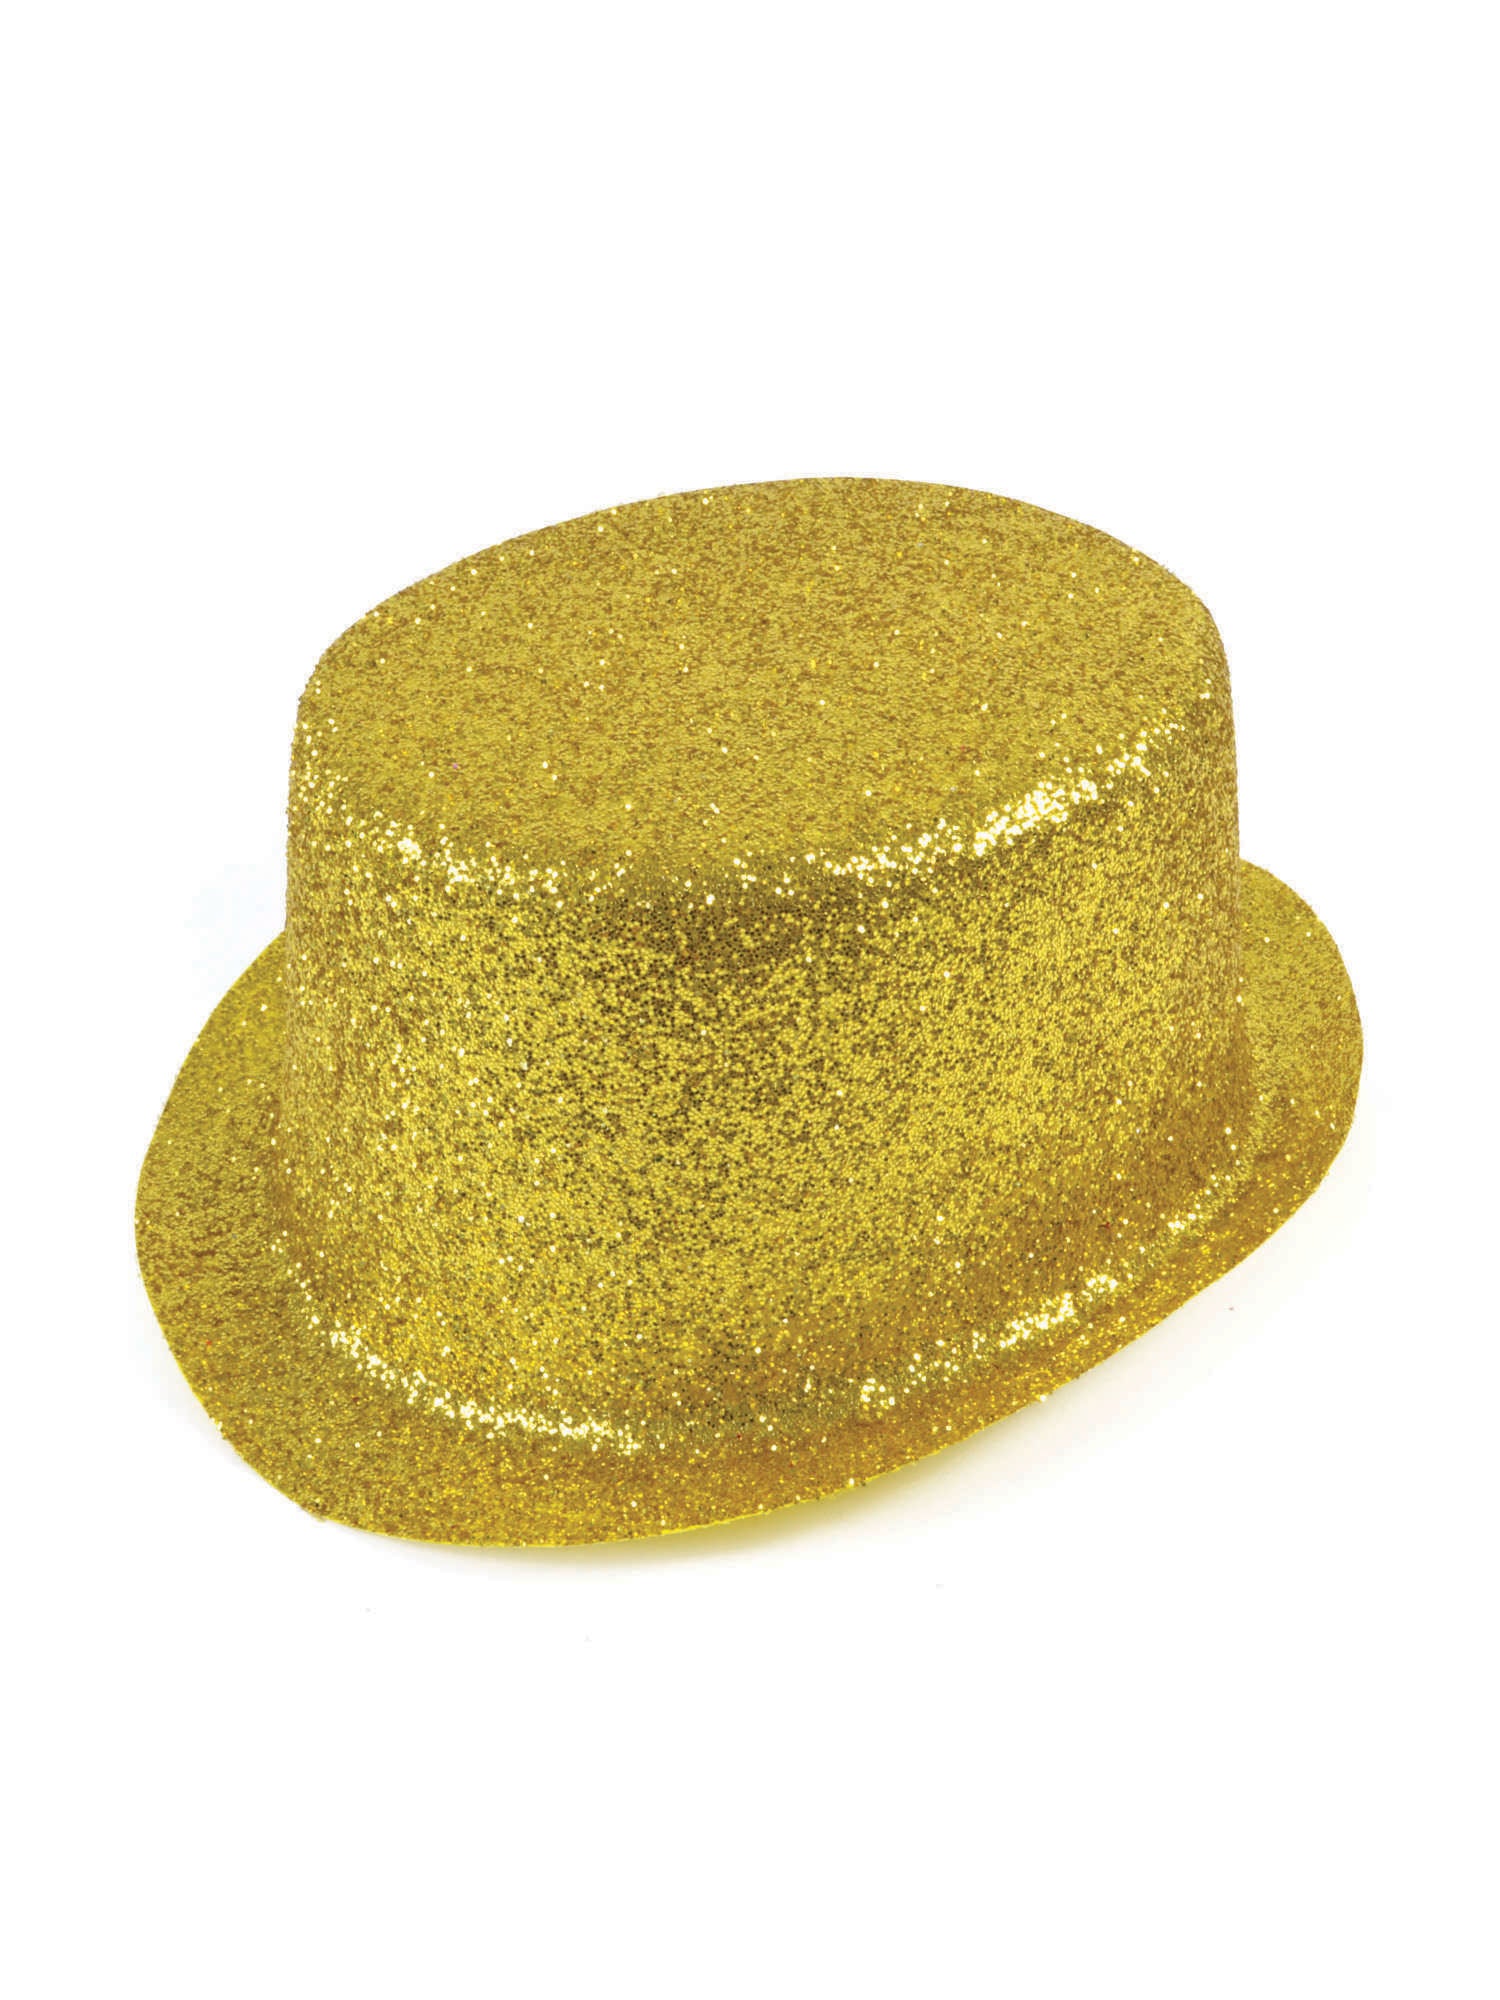 Top Hat, Gold, Generic, Hat, One Size, Front